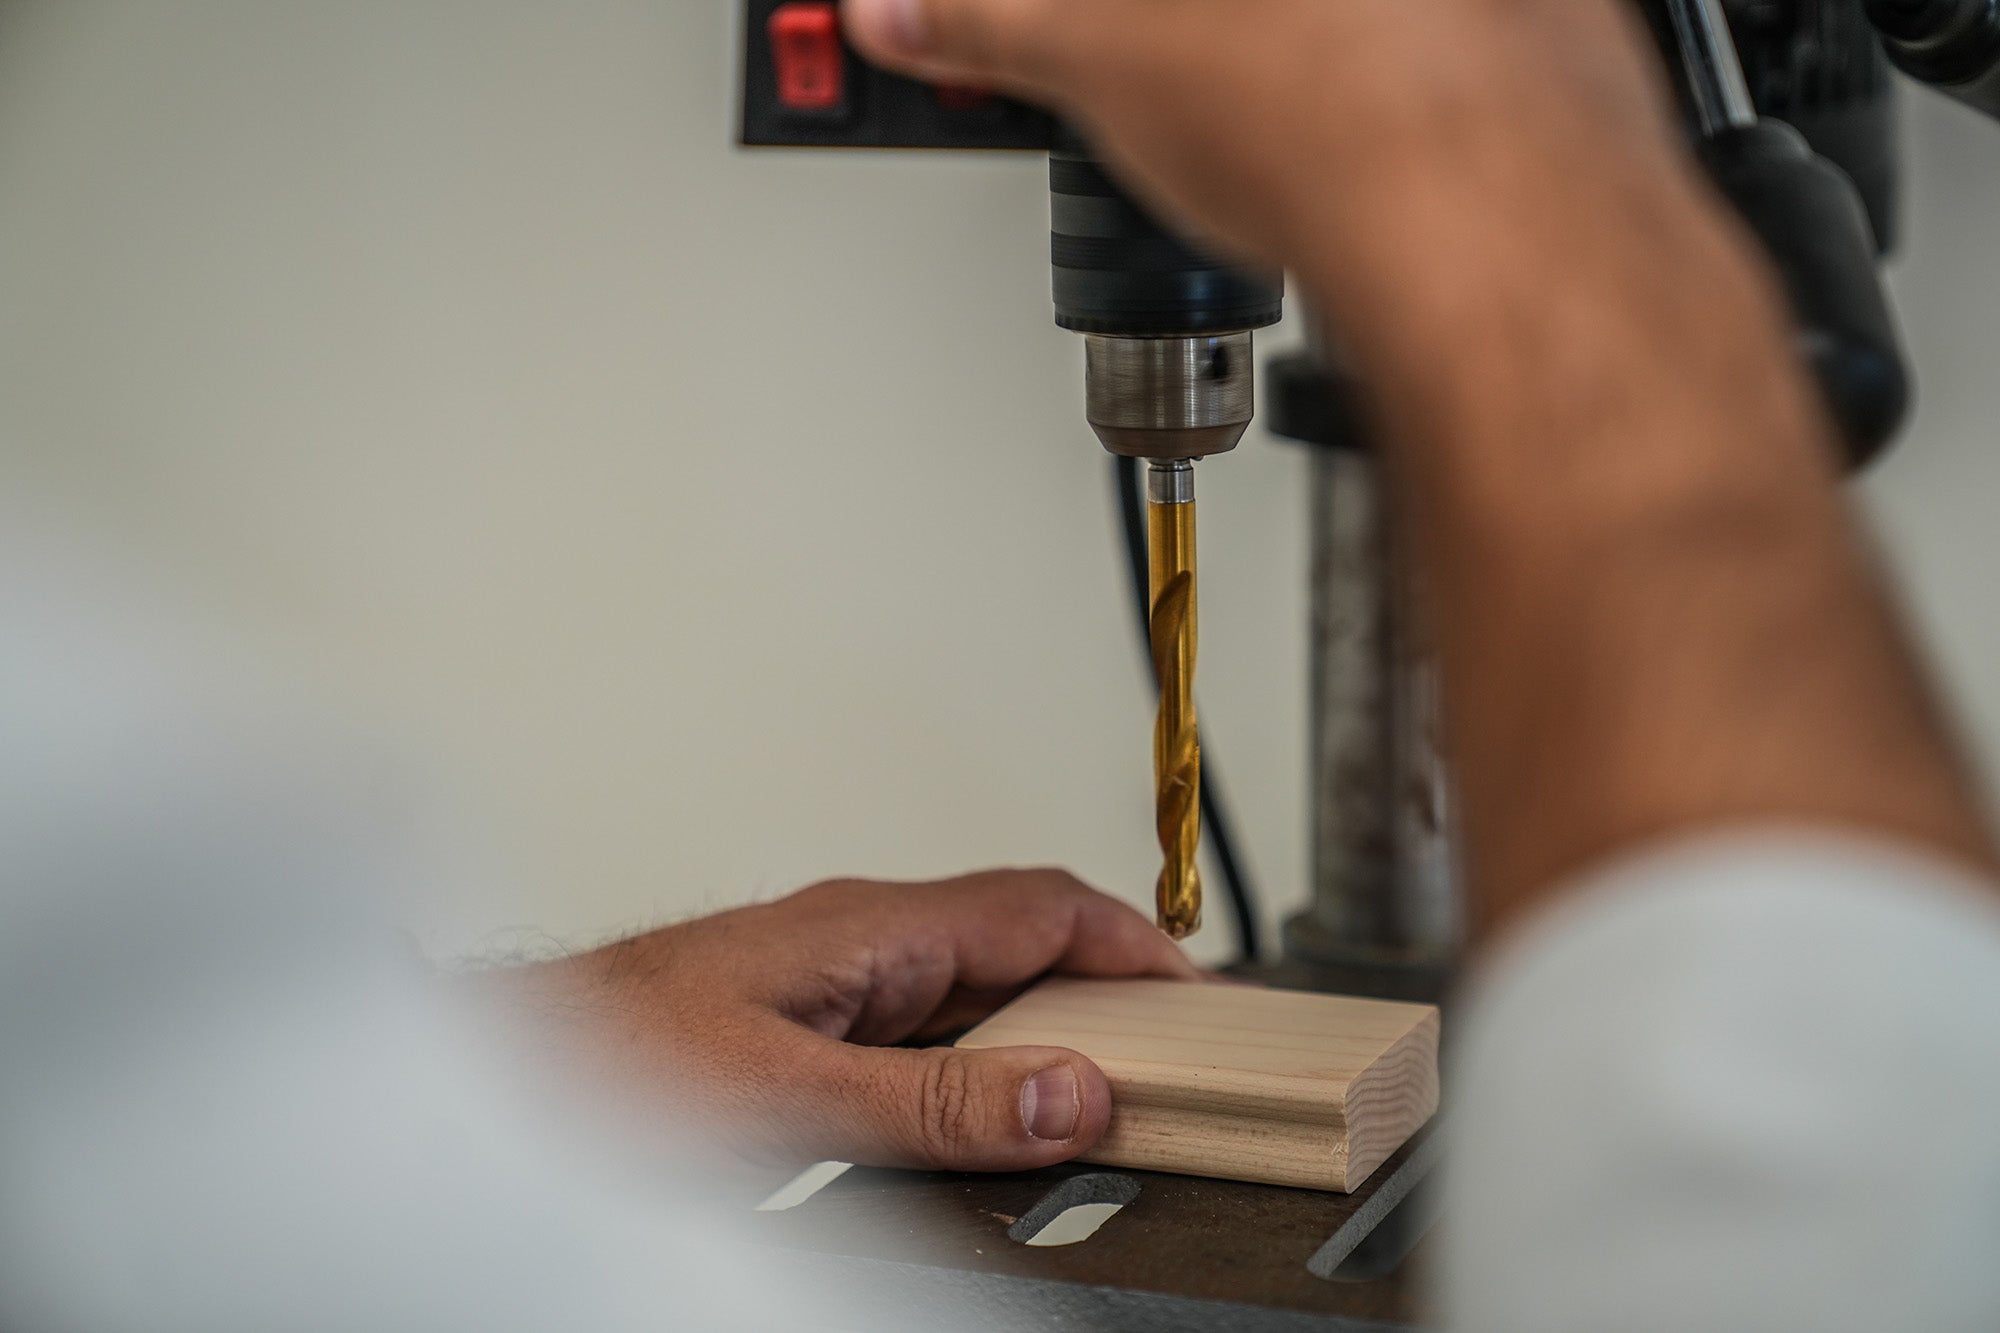 A craftsman precisely drilling into a block of wood to create a handle for a custom rubber stamp with the focus on the drill bit and the wood and the craftsman's hands guiding the process